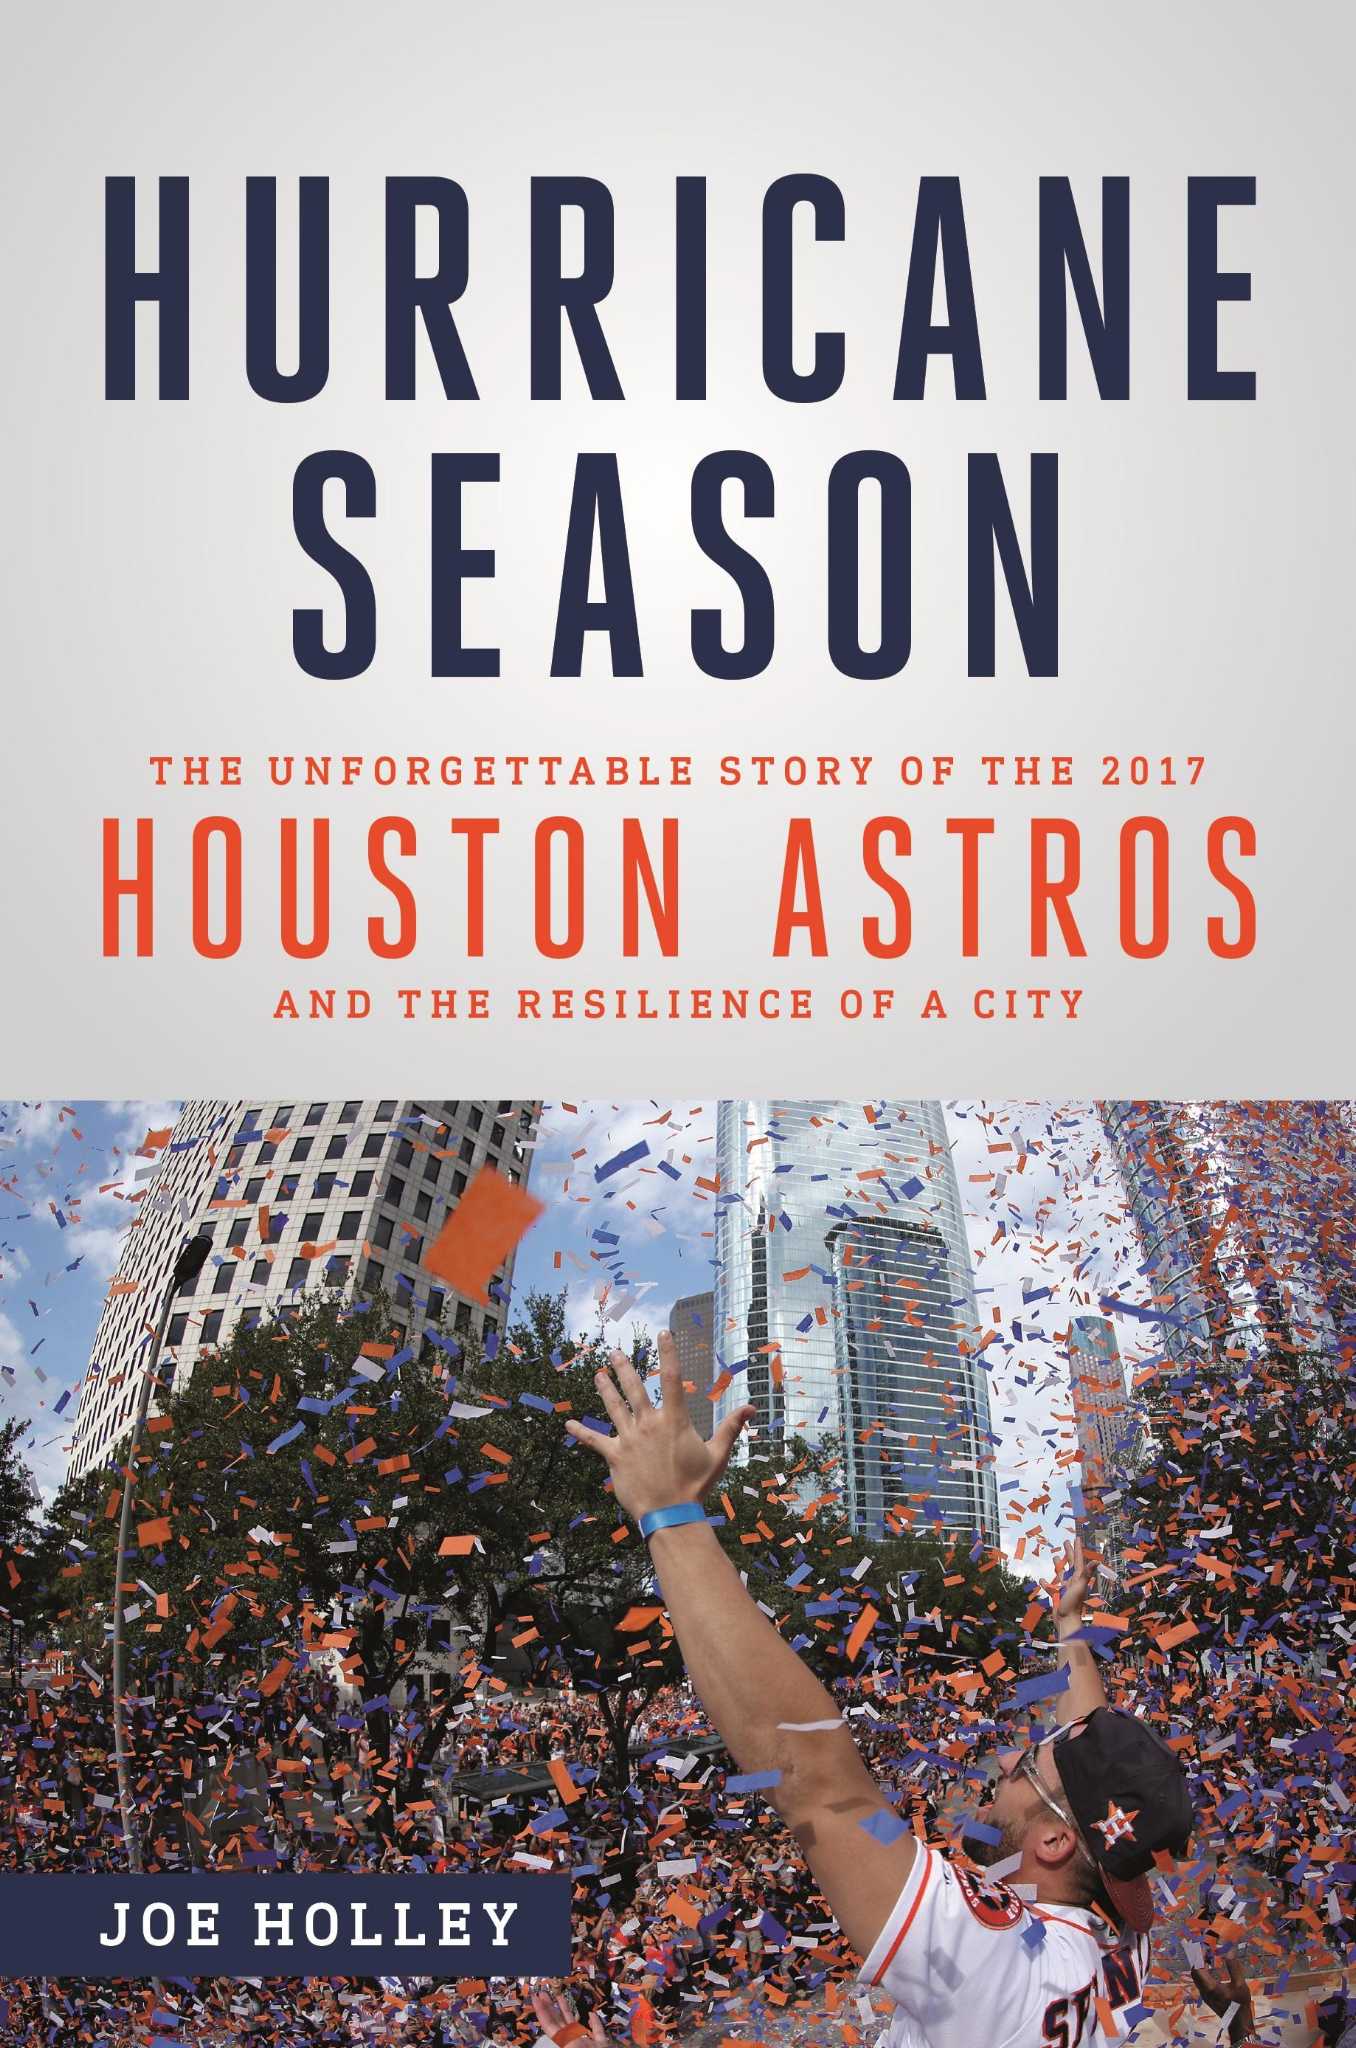 Hurricane Season The Unforgettable Story of the 2017 Houston Astros and the Resilience of a City